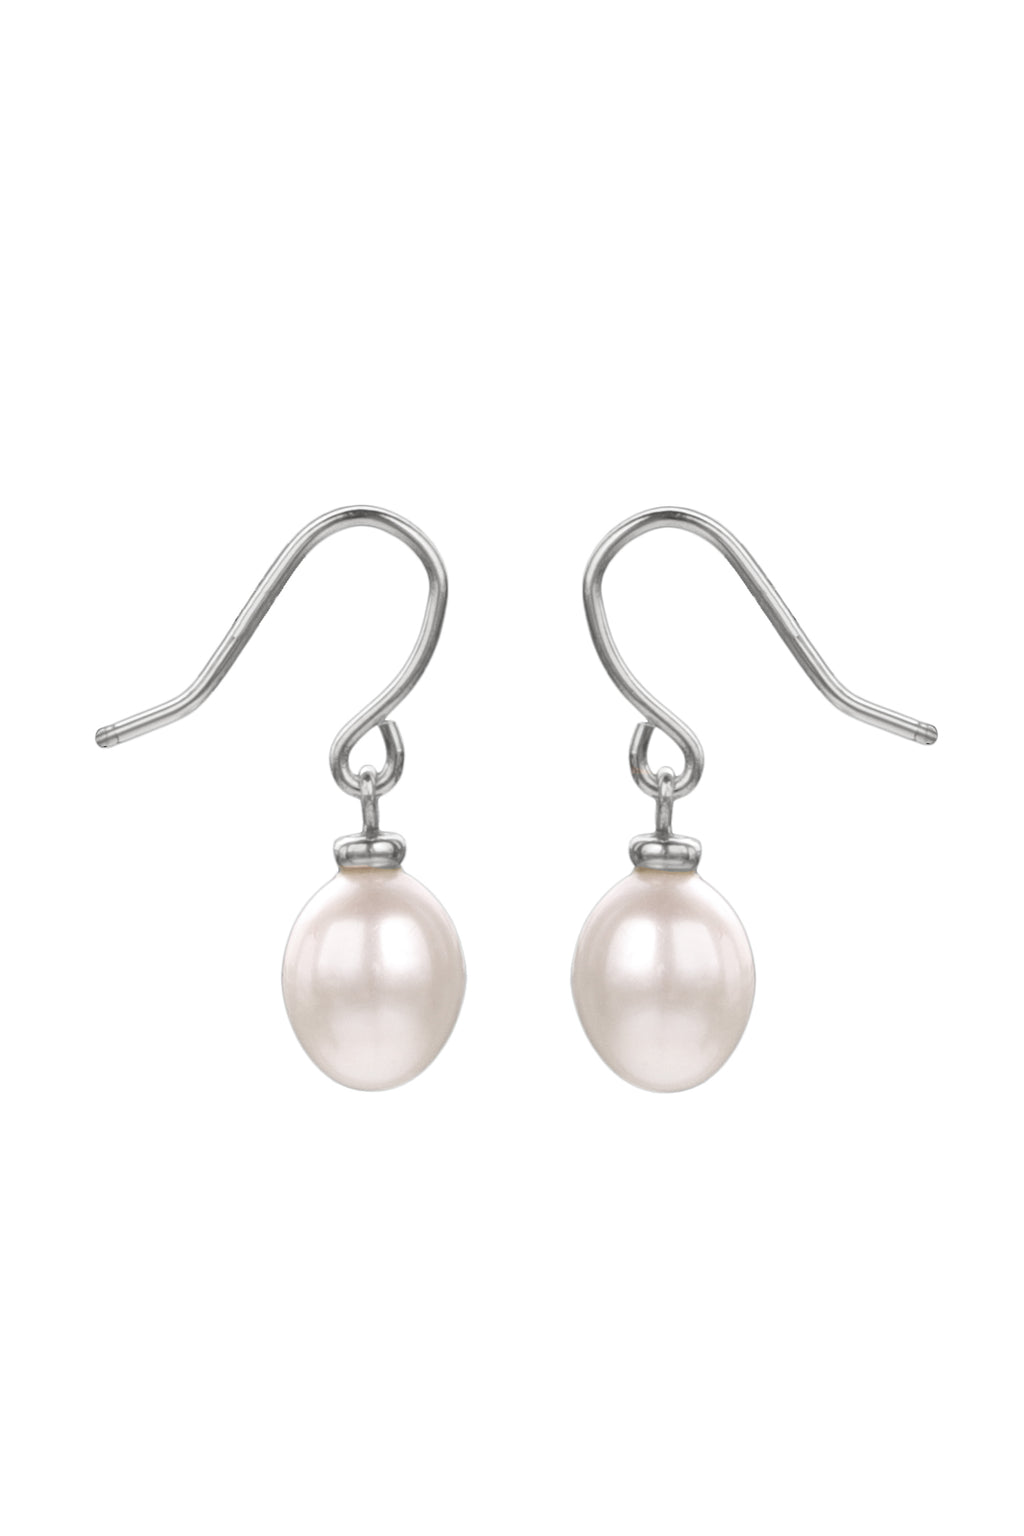 9ct White Gold FW Pearl on Cup & Hook